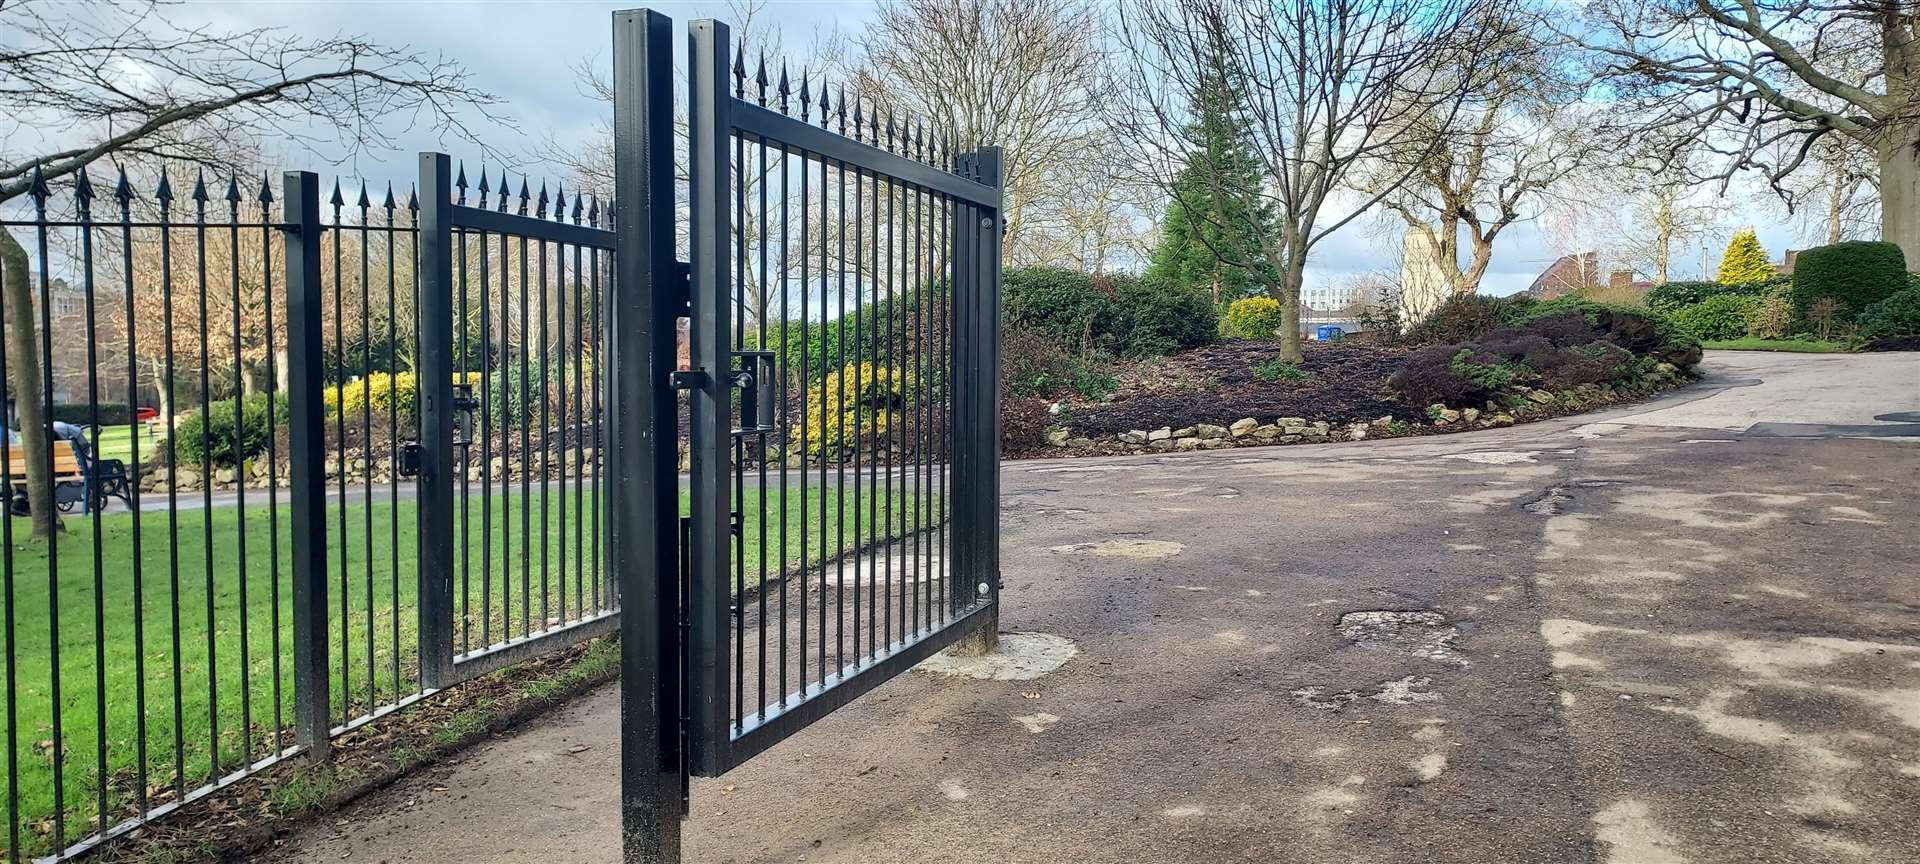 New gates have been installed to enable overnight closure of the park